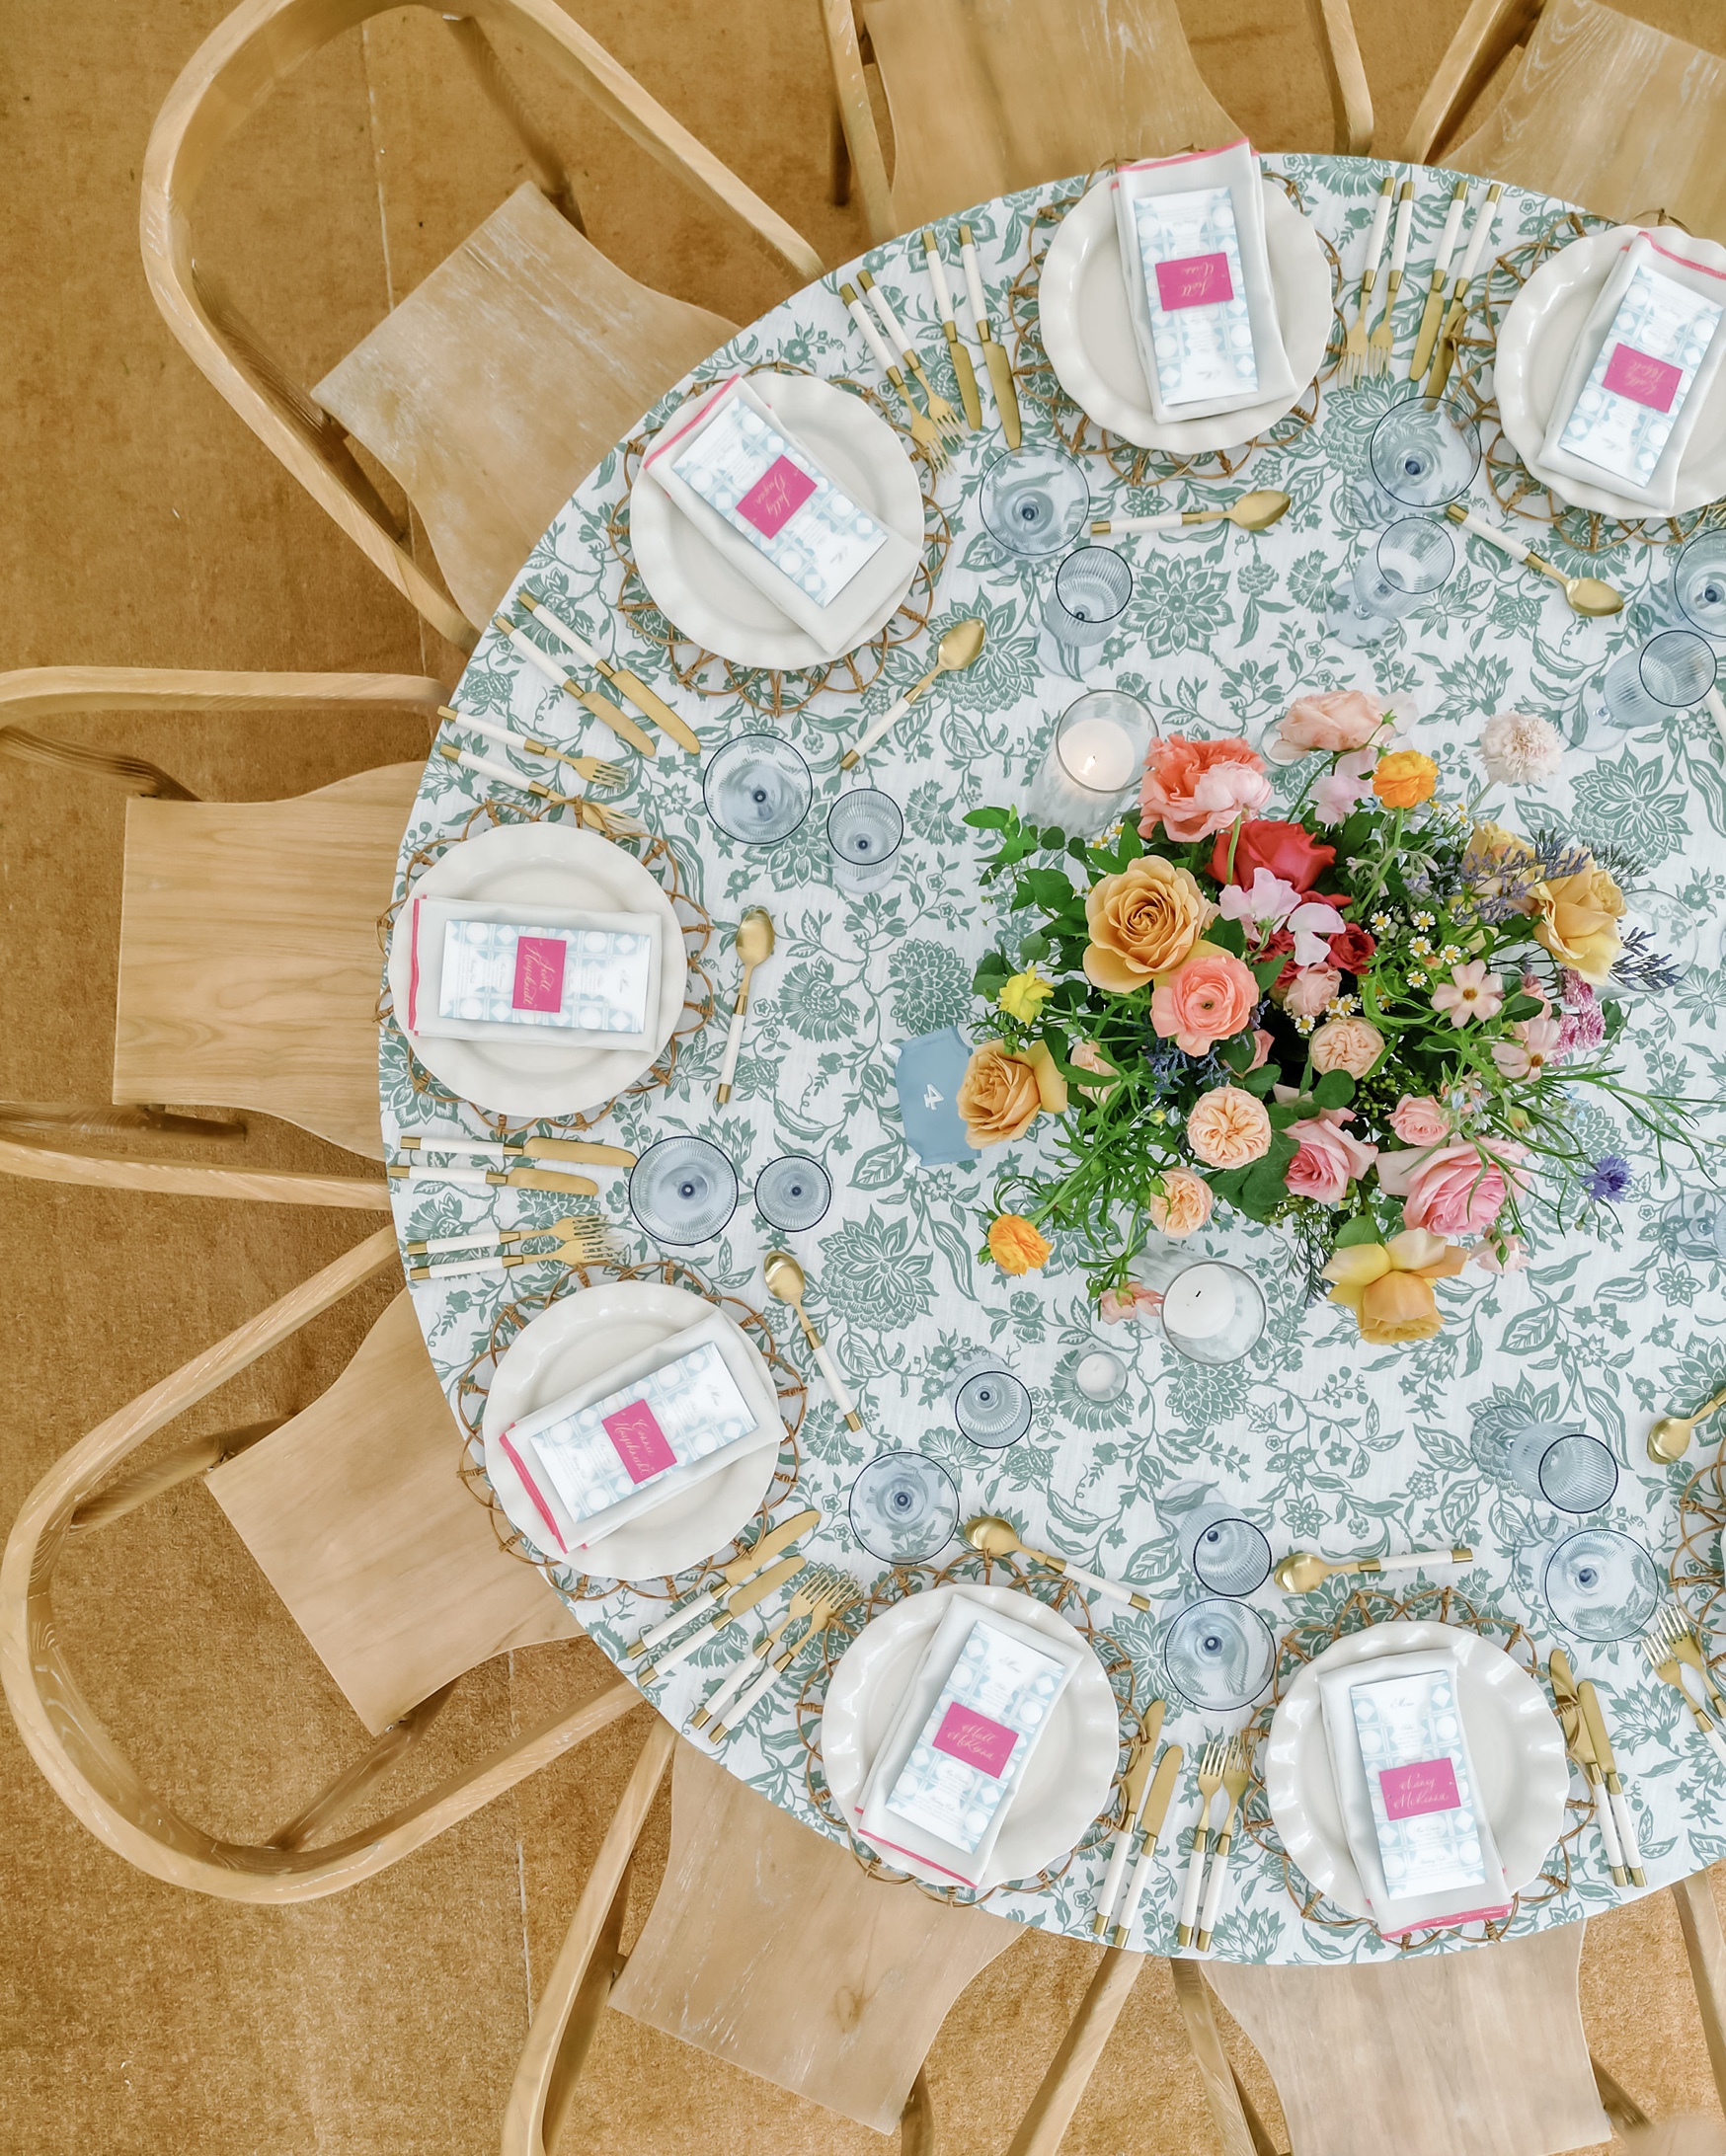 Patterned tablecloth at the tented wedding reception